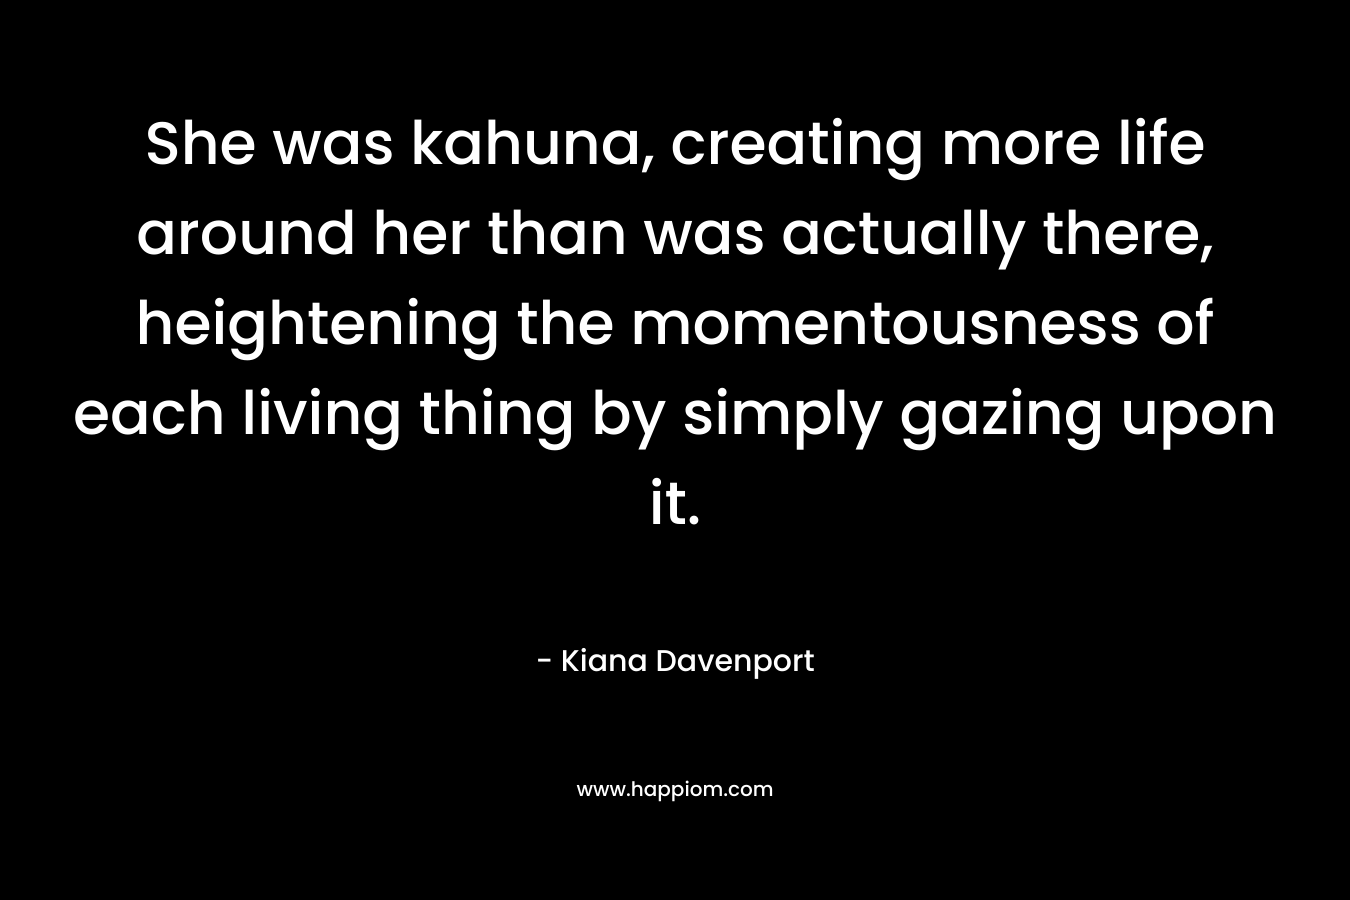 She was kahuna, creating more life around her than was actually there, heightening the momentousness of each living thing by simply gazing upon it. – Kiana Davenport